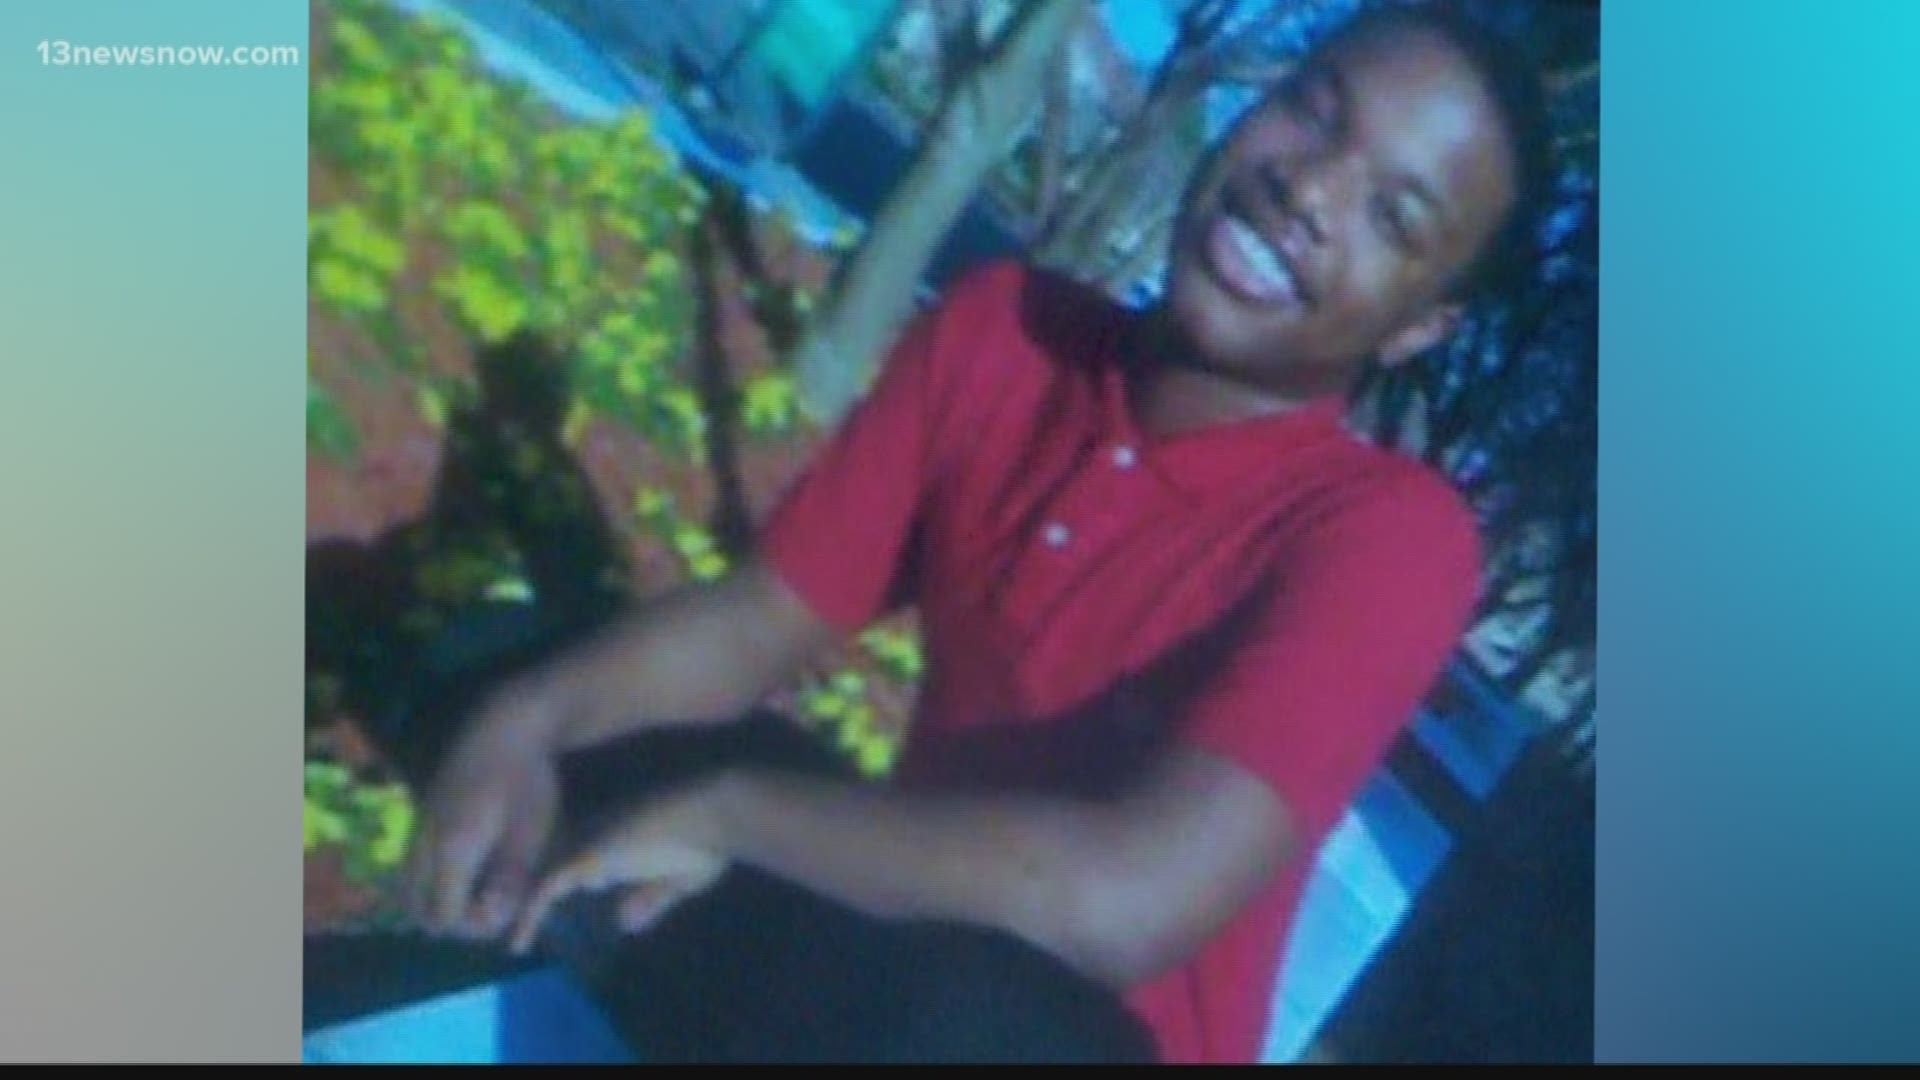 Norfolk police are working to find out what led to the death of 15-year-old Daemon Person.